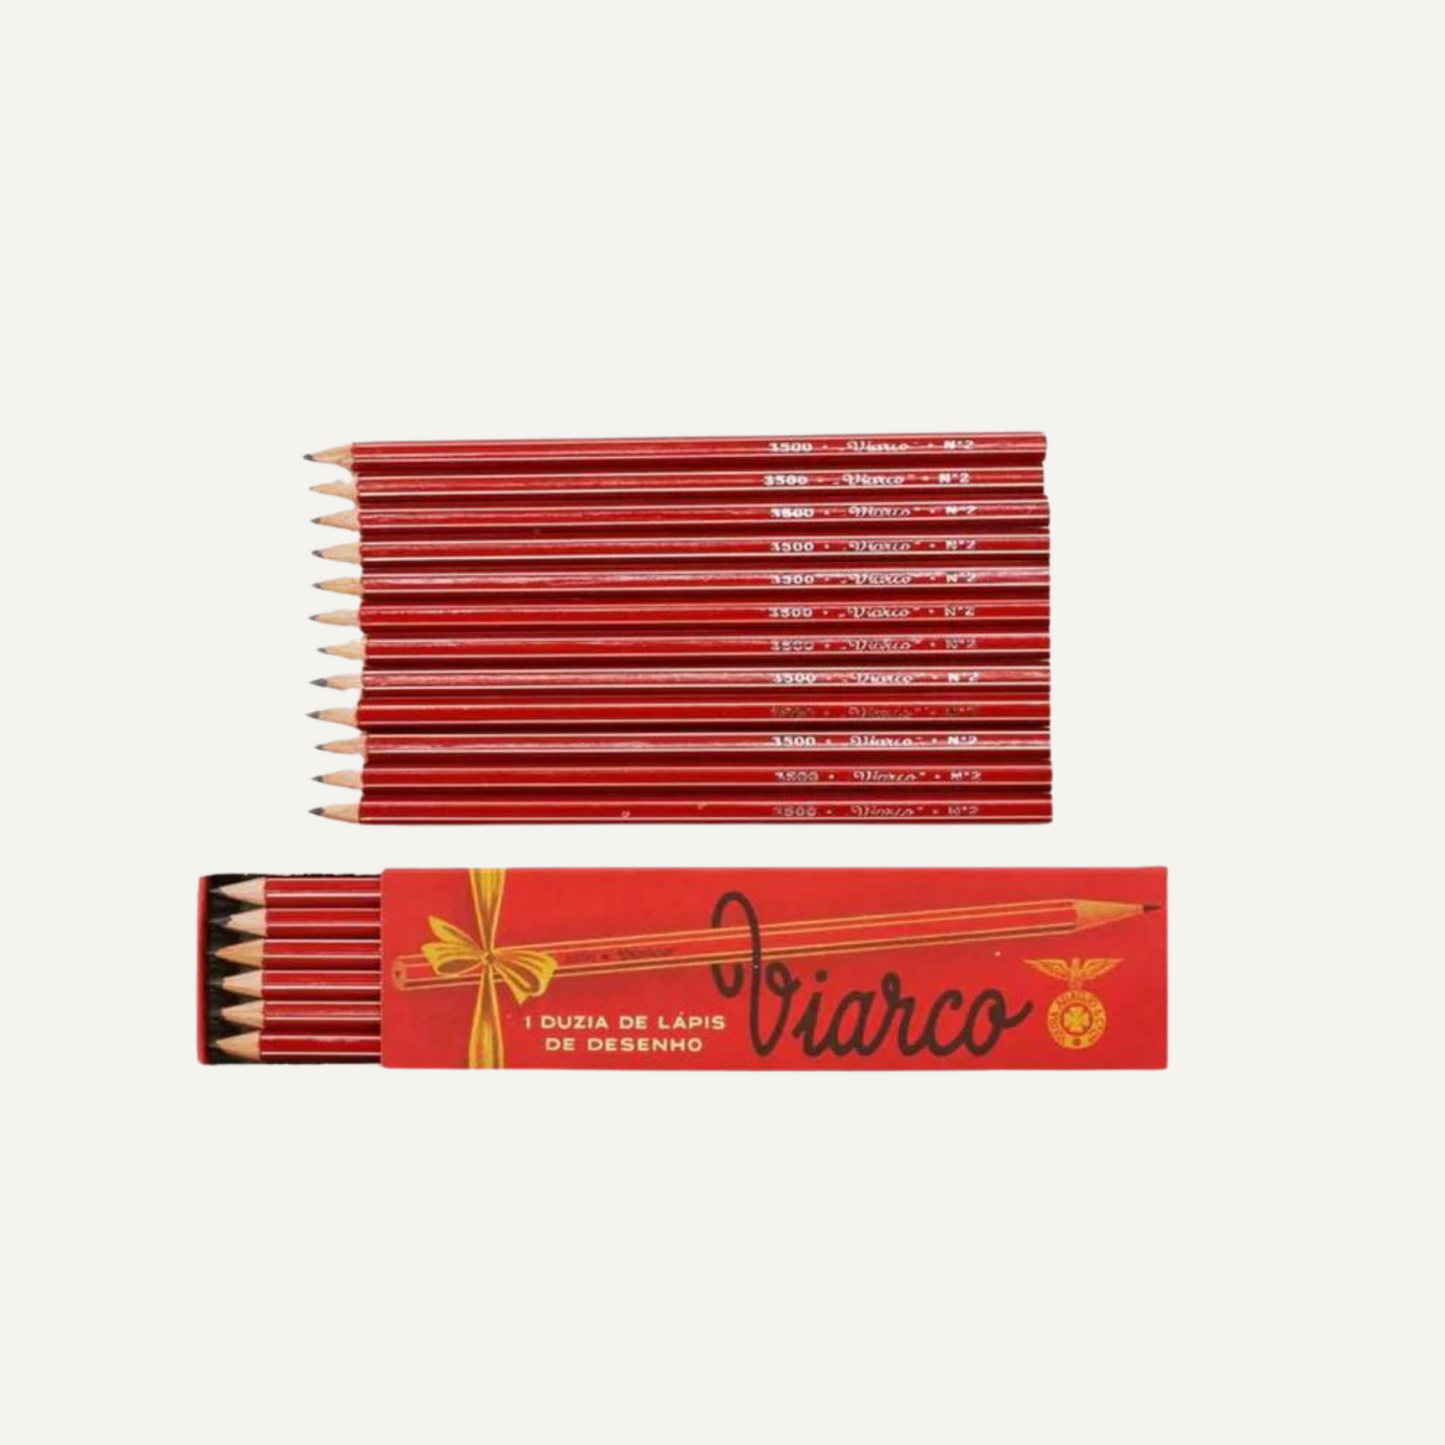 Viarco Vintage Pencils from Portugal